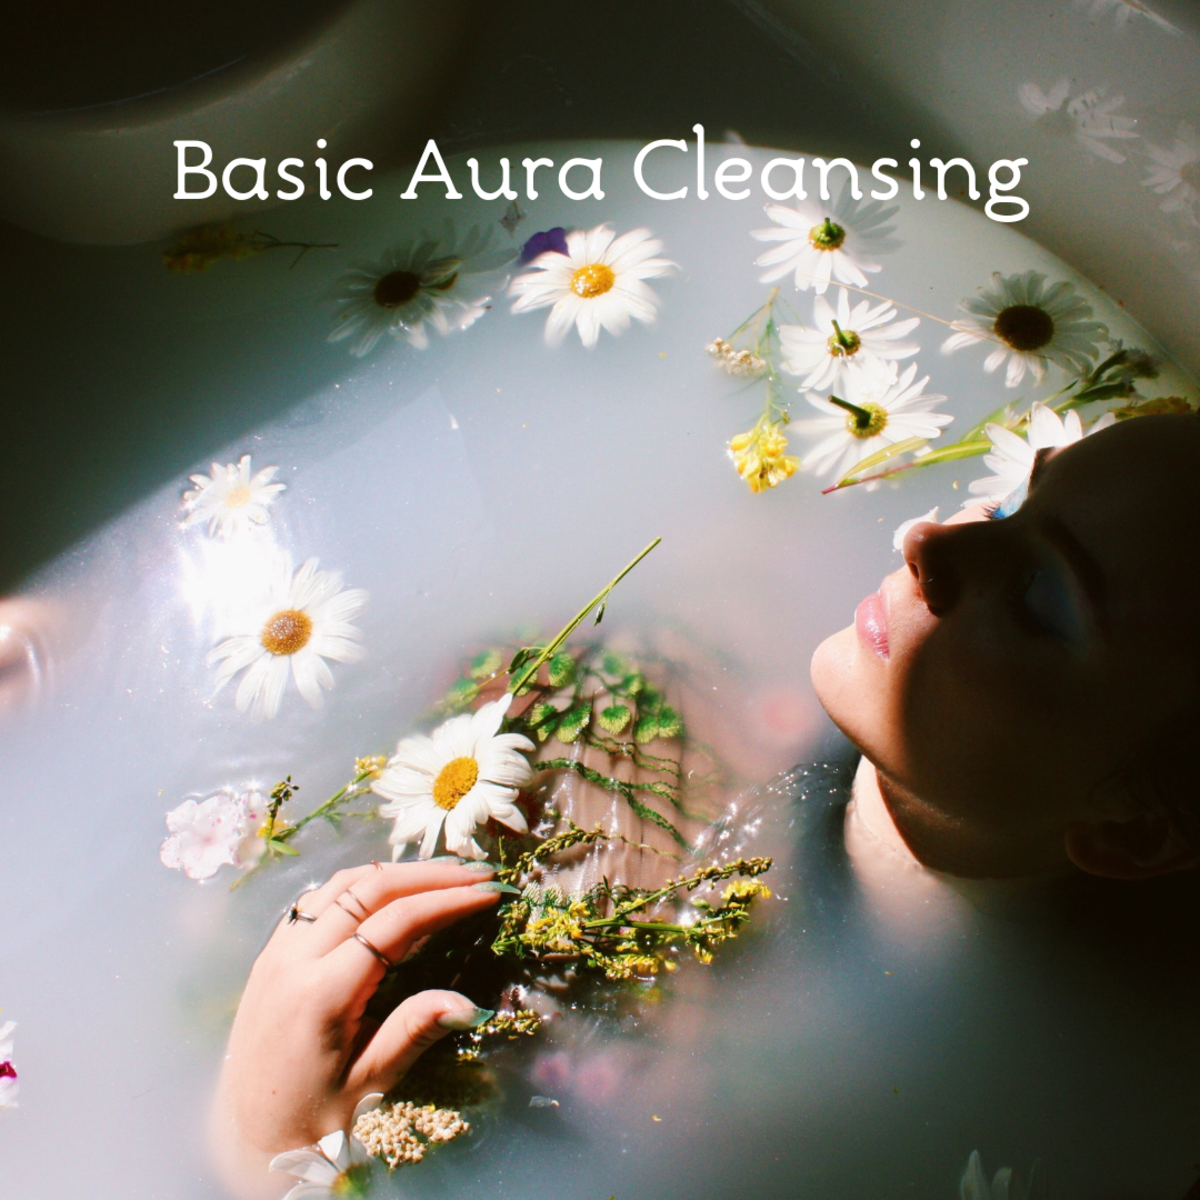 Basics of Cleansing Your Aura